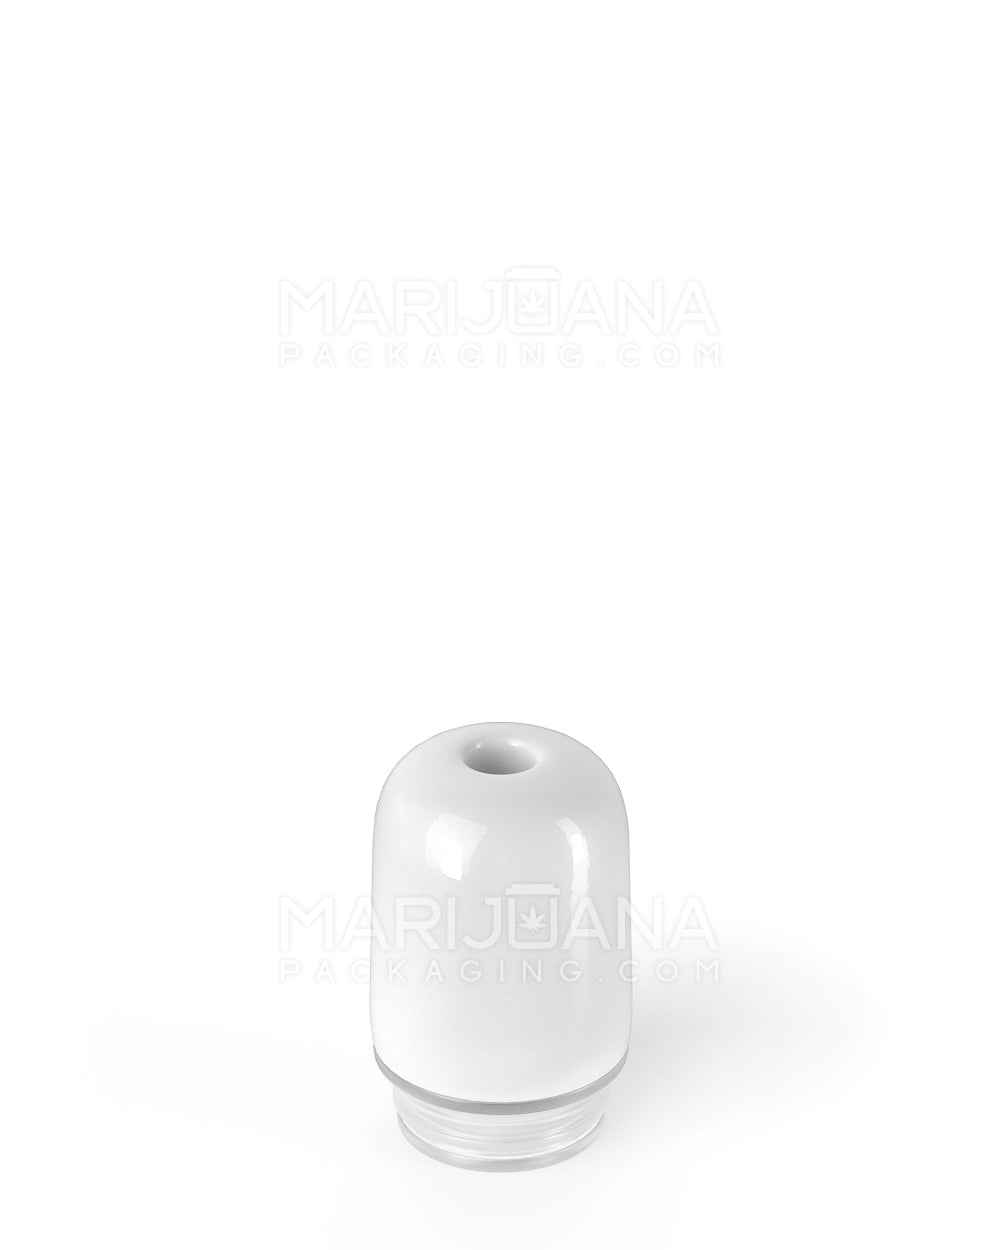 AVD | Round Vape Mouthpiece for Glass Cartridges | White Ceramic - Eazy Press - 600 Count - 3